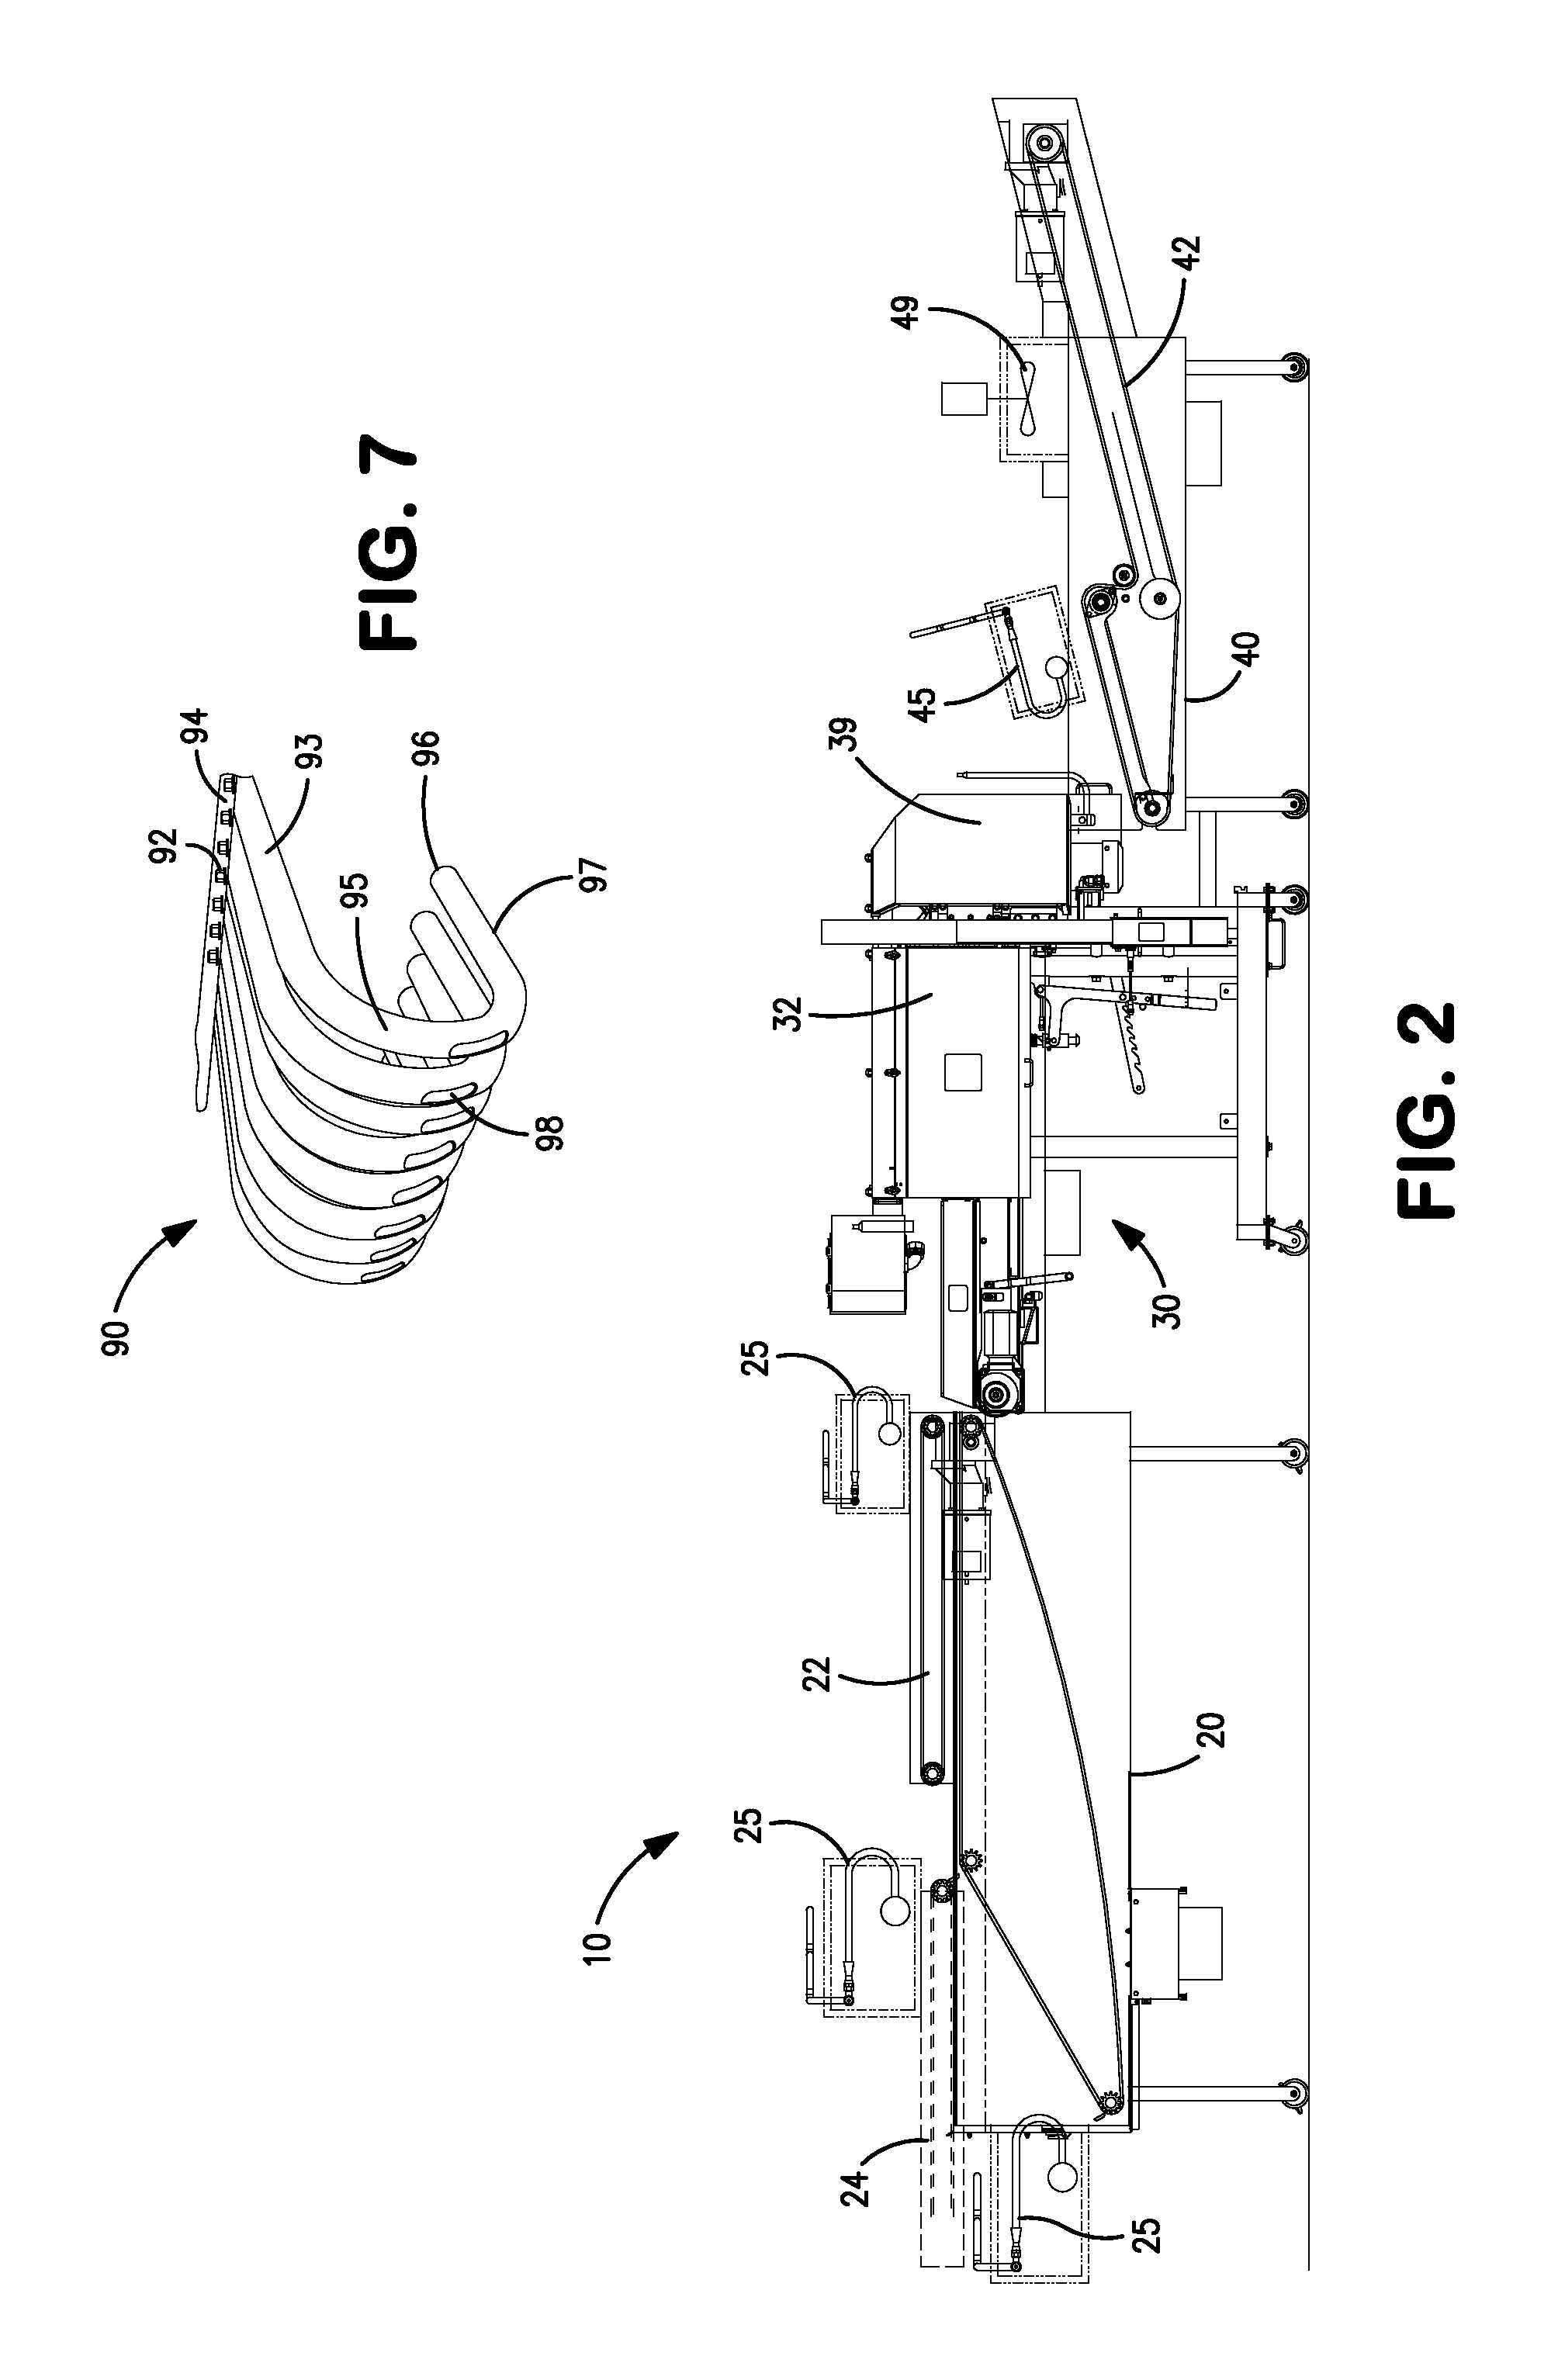 System and method of chilling a food product proximate to and in a food processing device